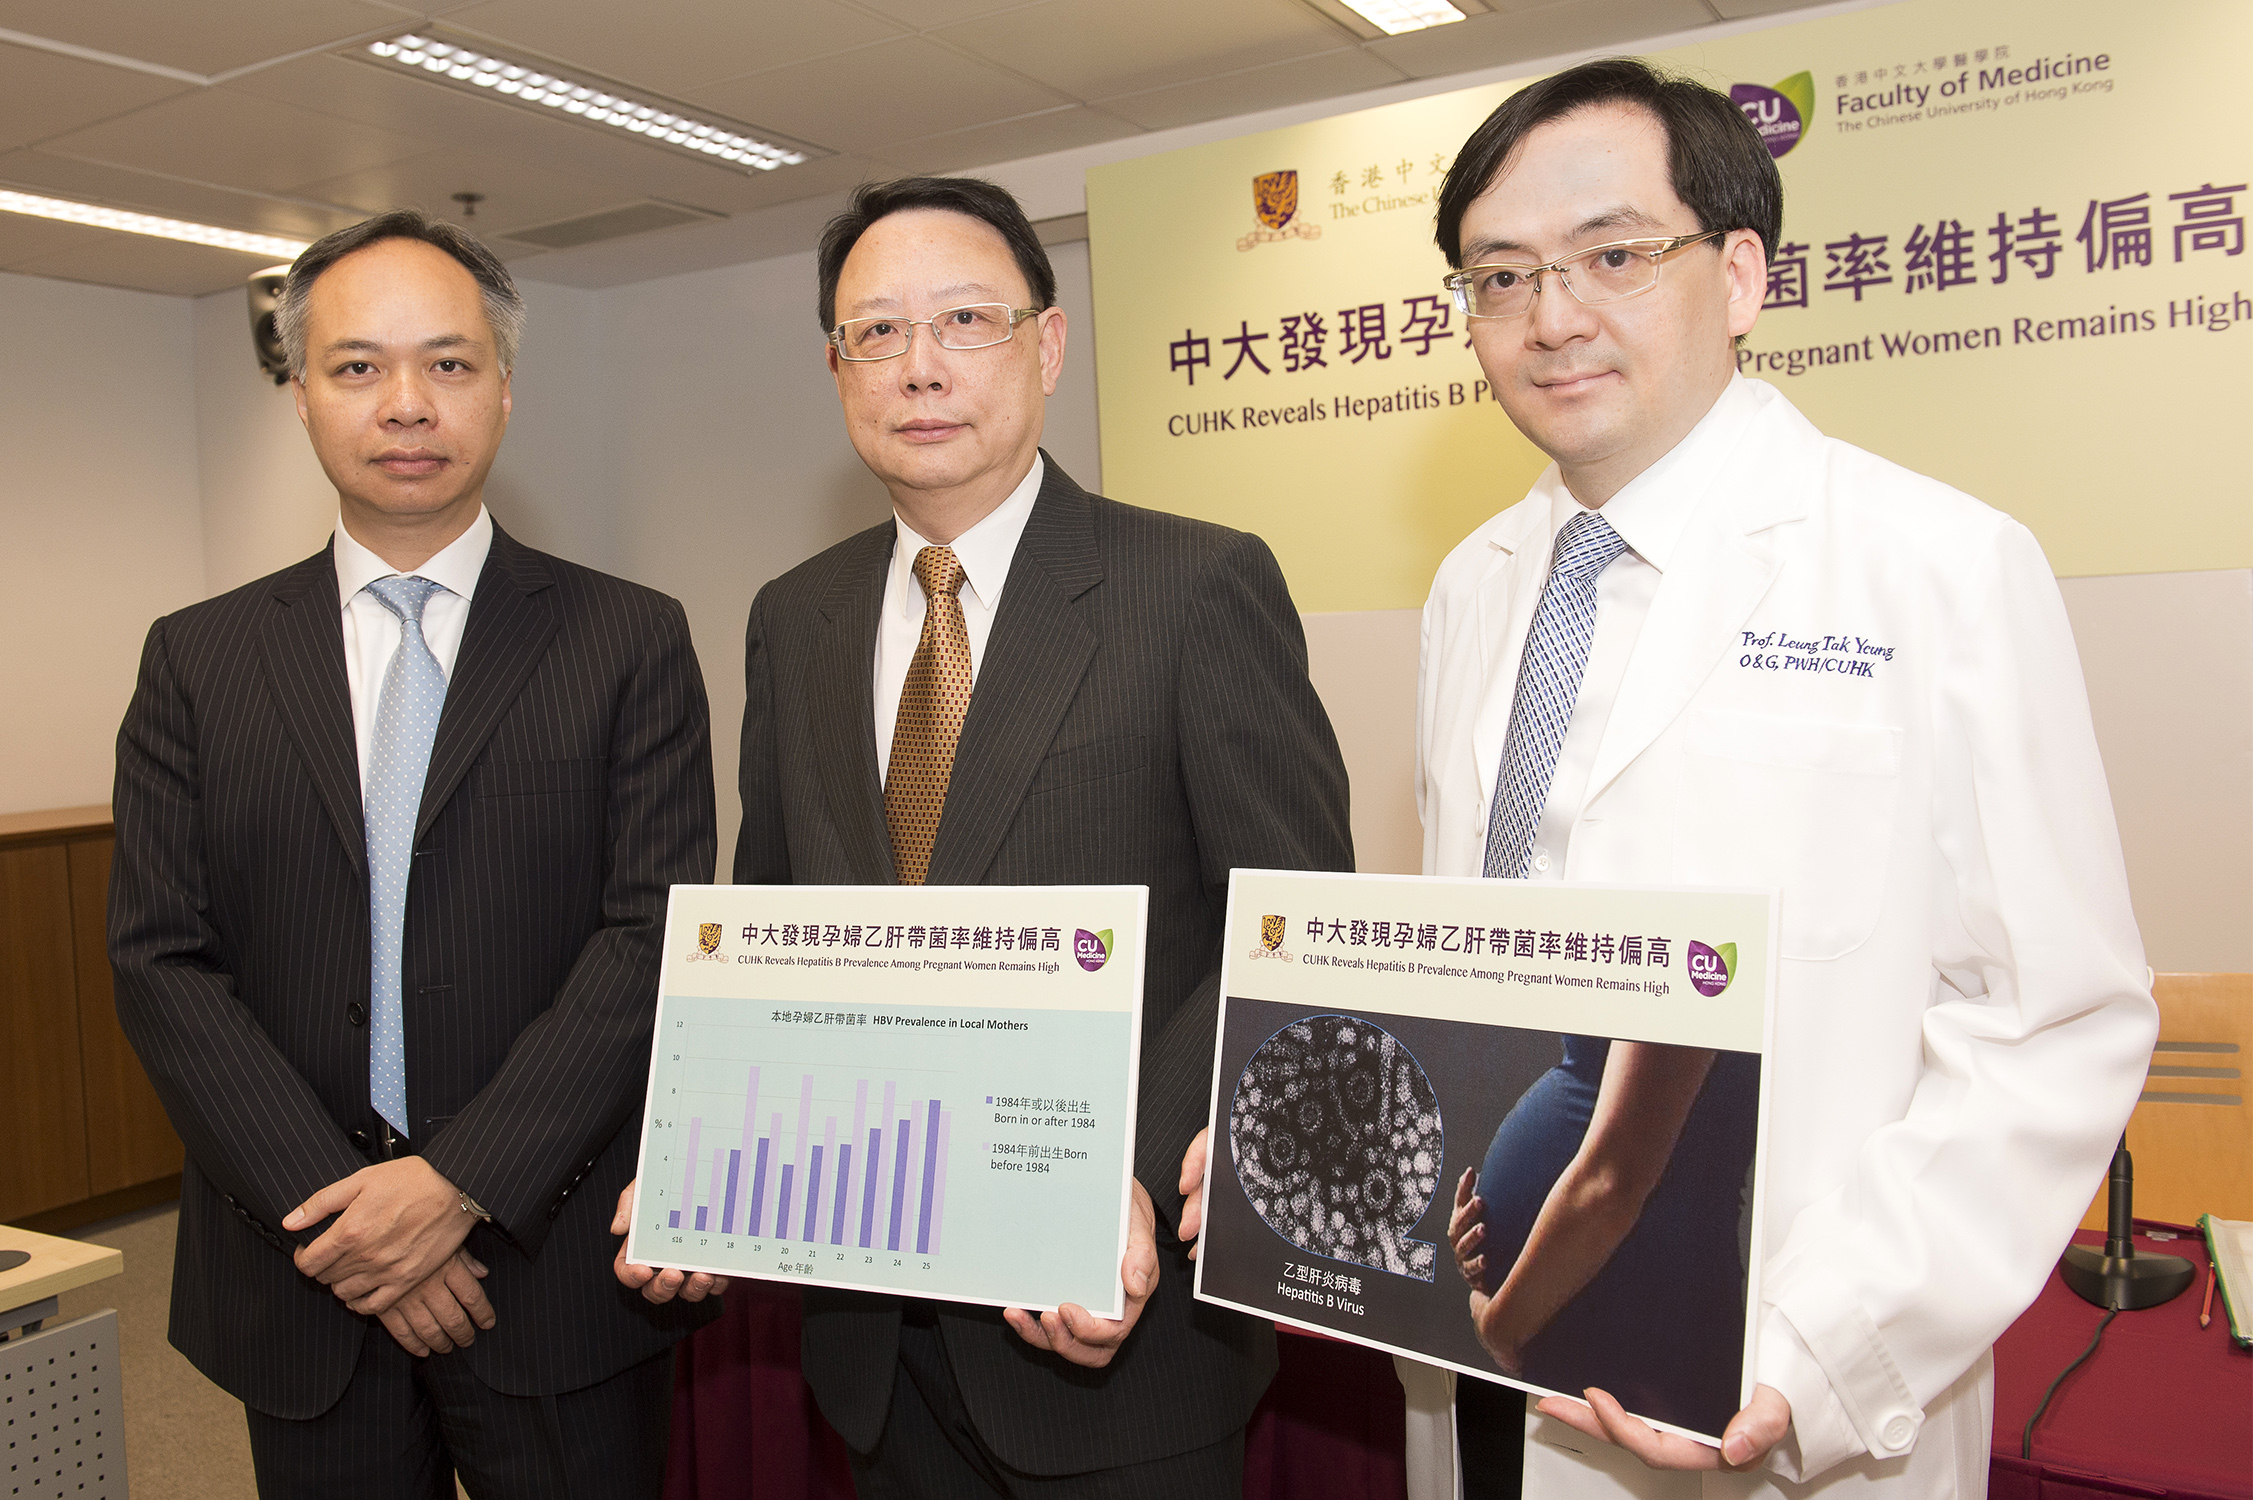 Professor Tak Yeung LEUNG,  Chairman, Department of Obstetrics and Gynaecology